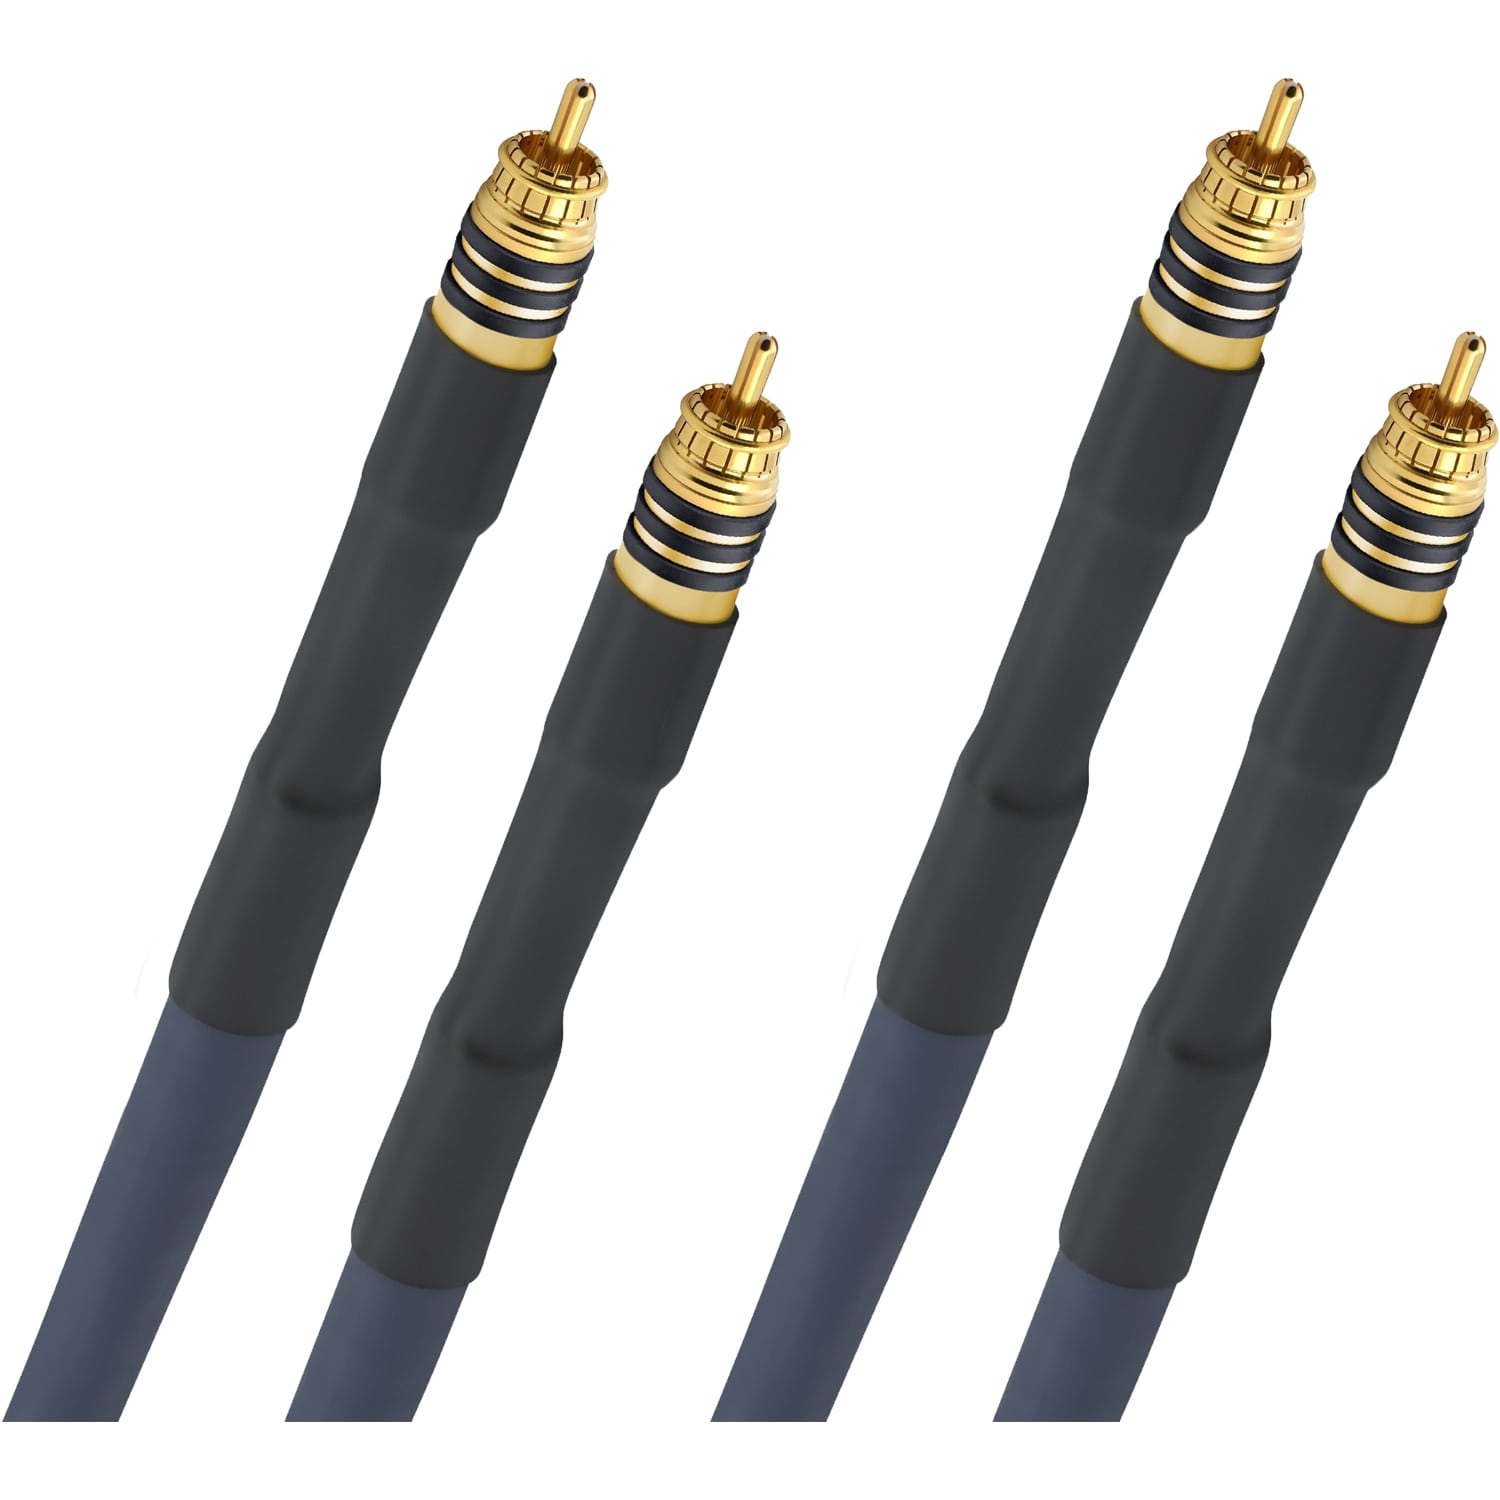 Кабели межблочные аудио Oehlbach STATE OF THE ART XXL Cable RCA, 2x1,50m, gold, D1C13114 кабели межблочные аудио oehlbach excellence sub link subwoofer cable 5 0m bw d1c33162